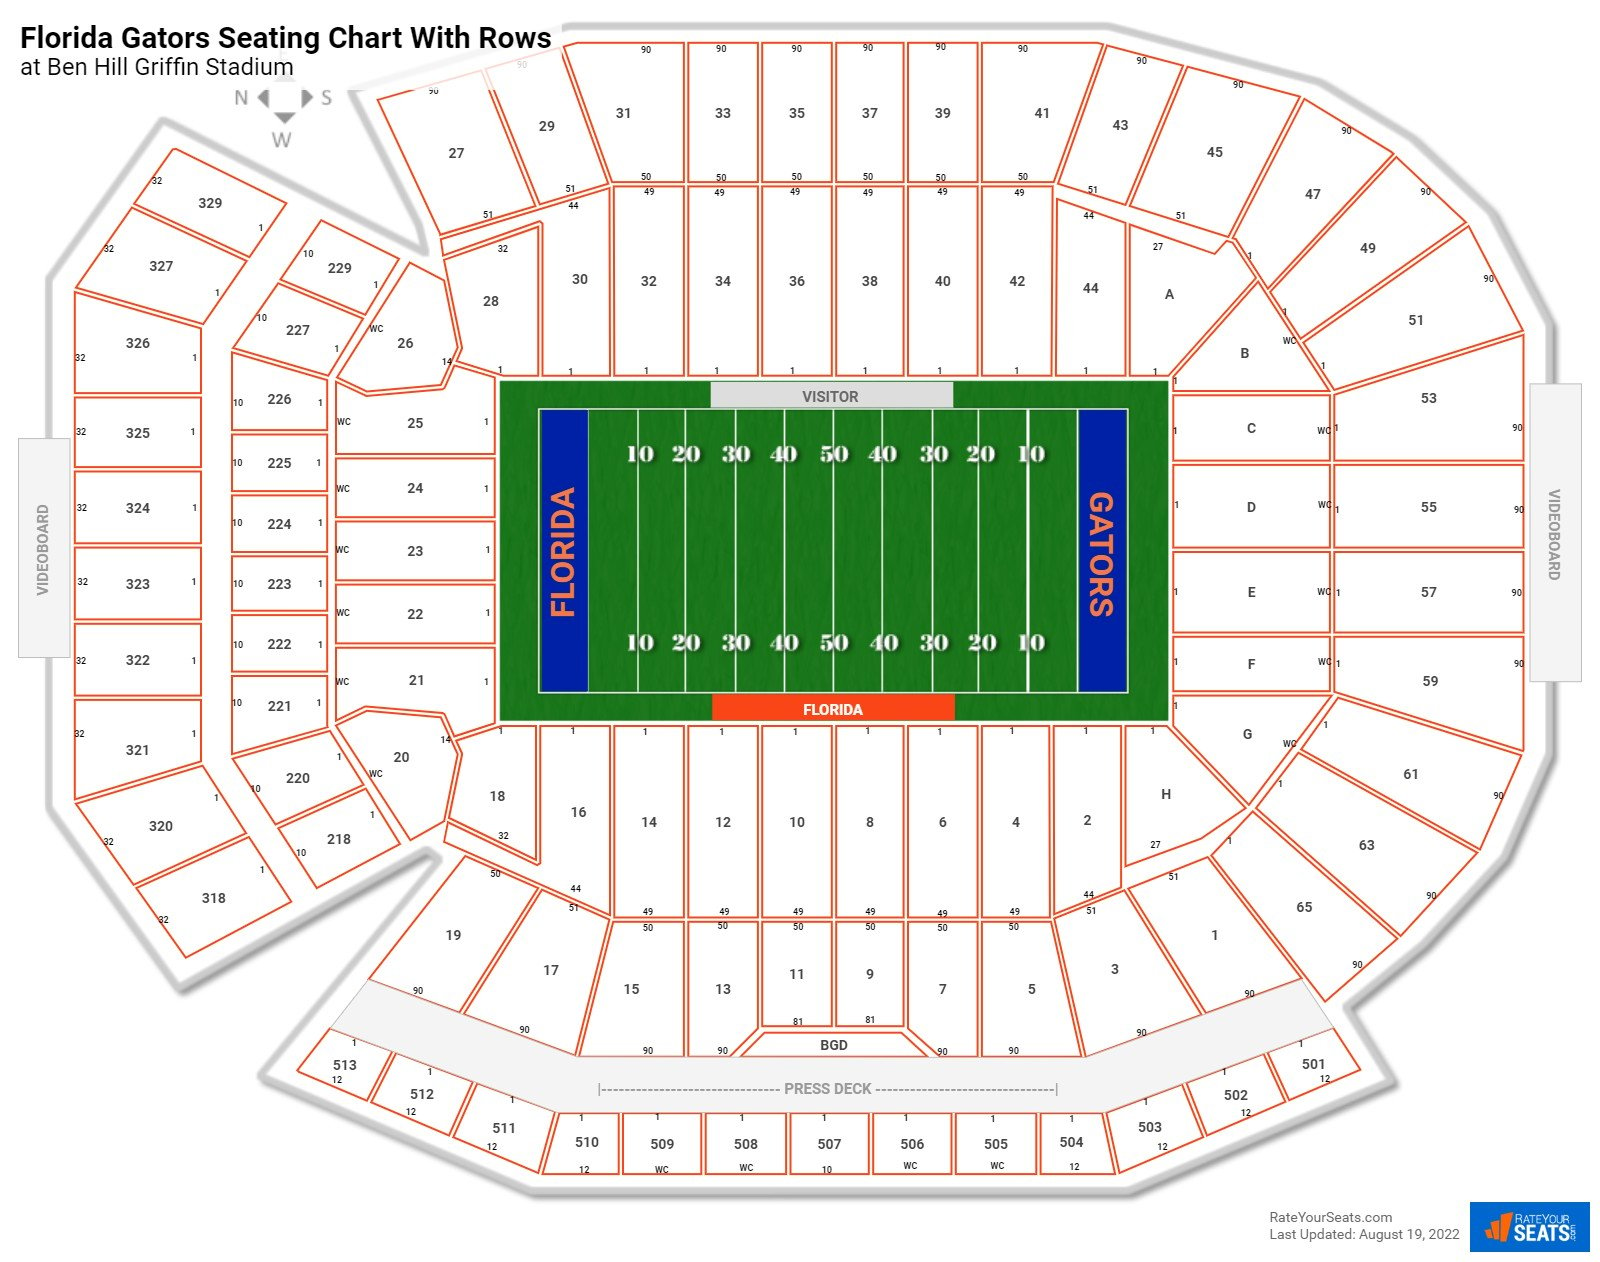 Ben Hill Griffin Stadium seating chart with row numbers